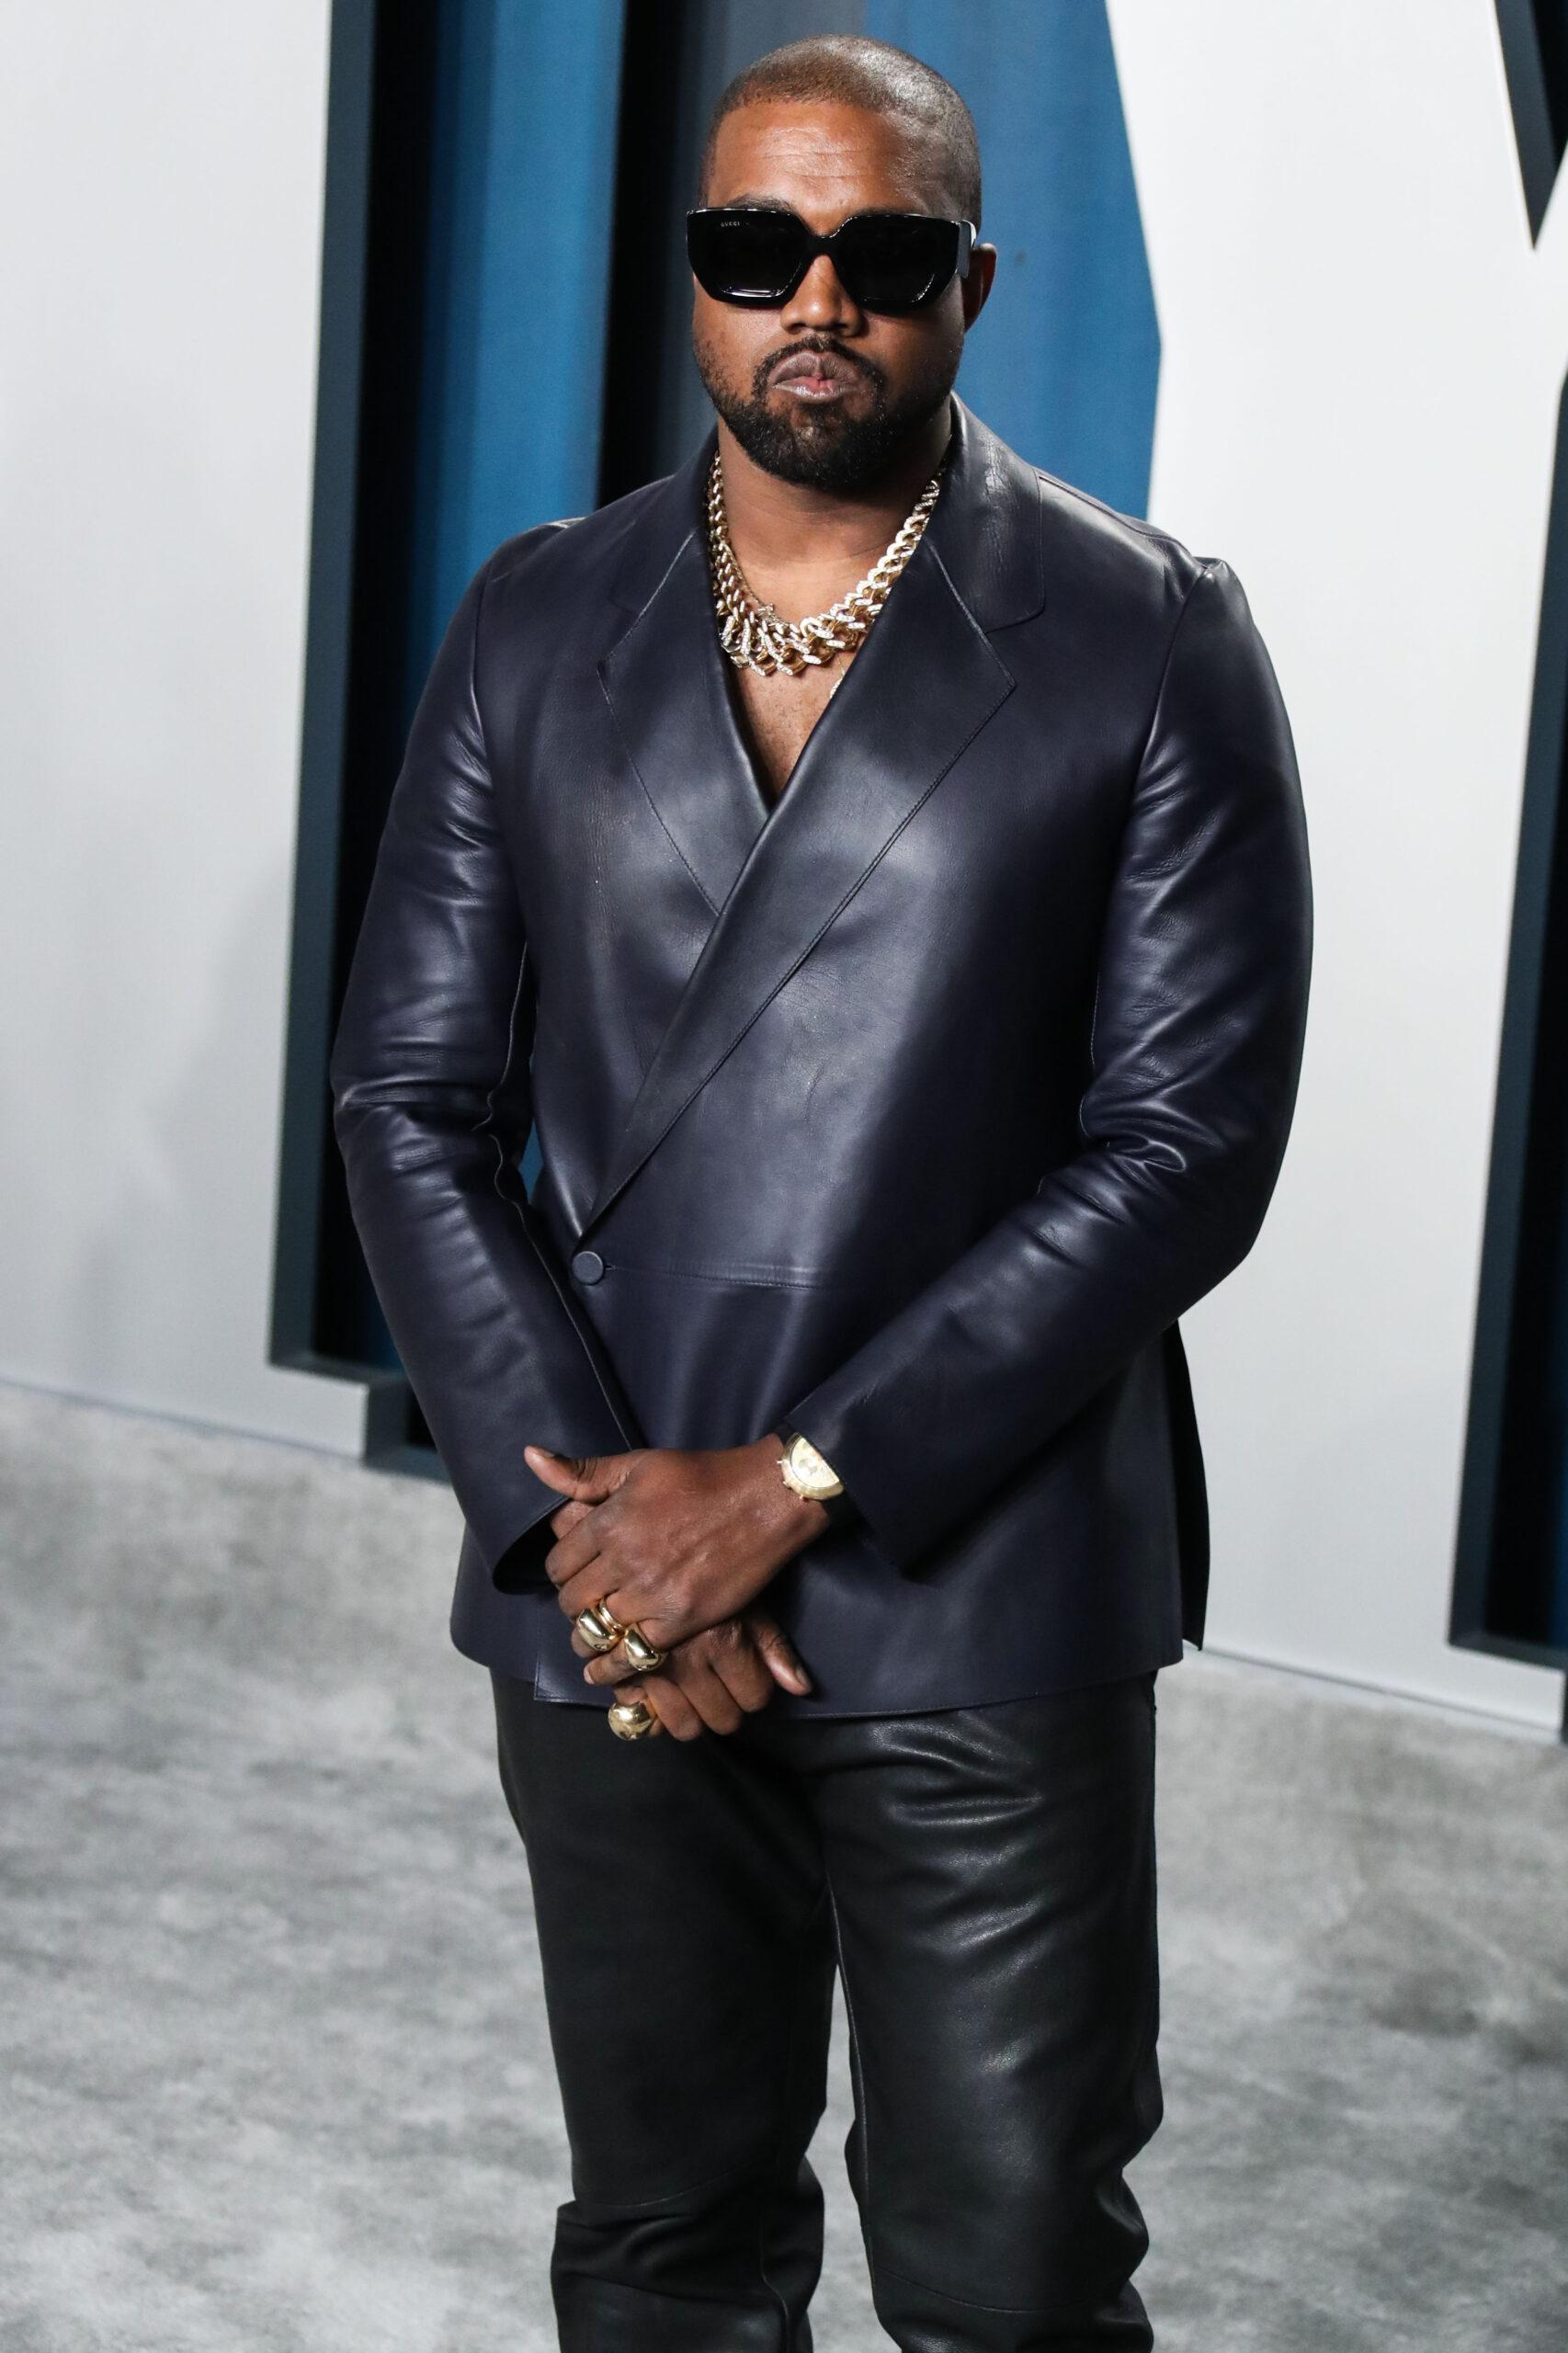 Kanye West rocking a black leather jacket and pant, with dark shades at an event.